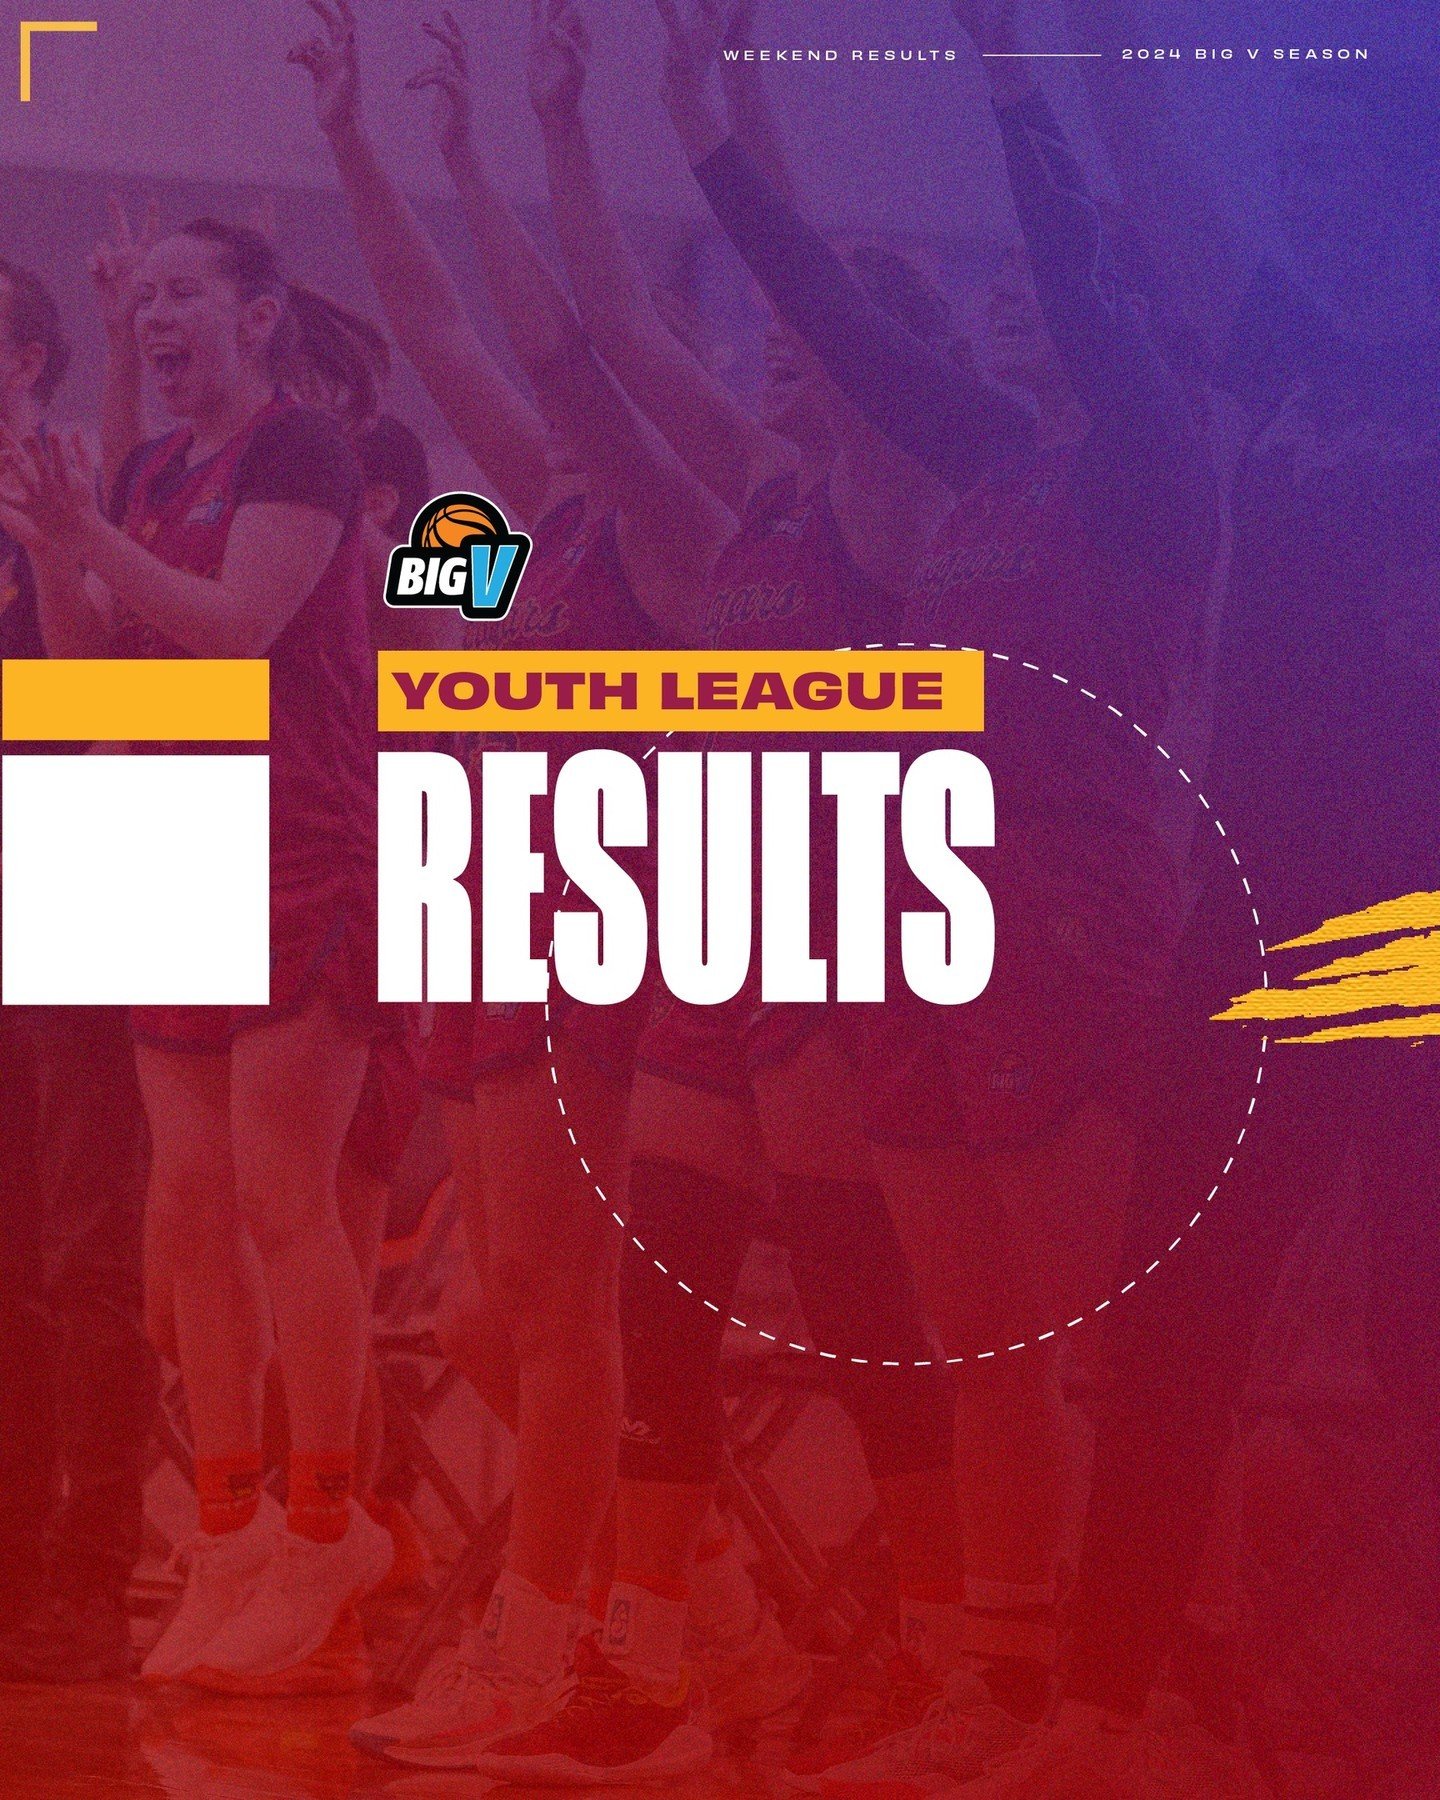 Big V Youth League Results 📣⁠
⁠
The McKinnon Cougars Youth League teams made it 2-0 this weekend!⁠
⁠
The Youth Men notched up their 7th win in a row to remain undefeated and the Youth Women won their 4th game in a row to make them 5-2.⁠
⁠
@bigv_ball